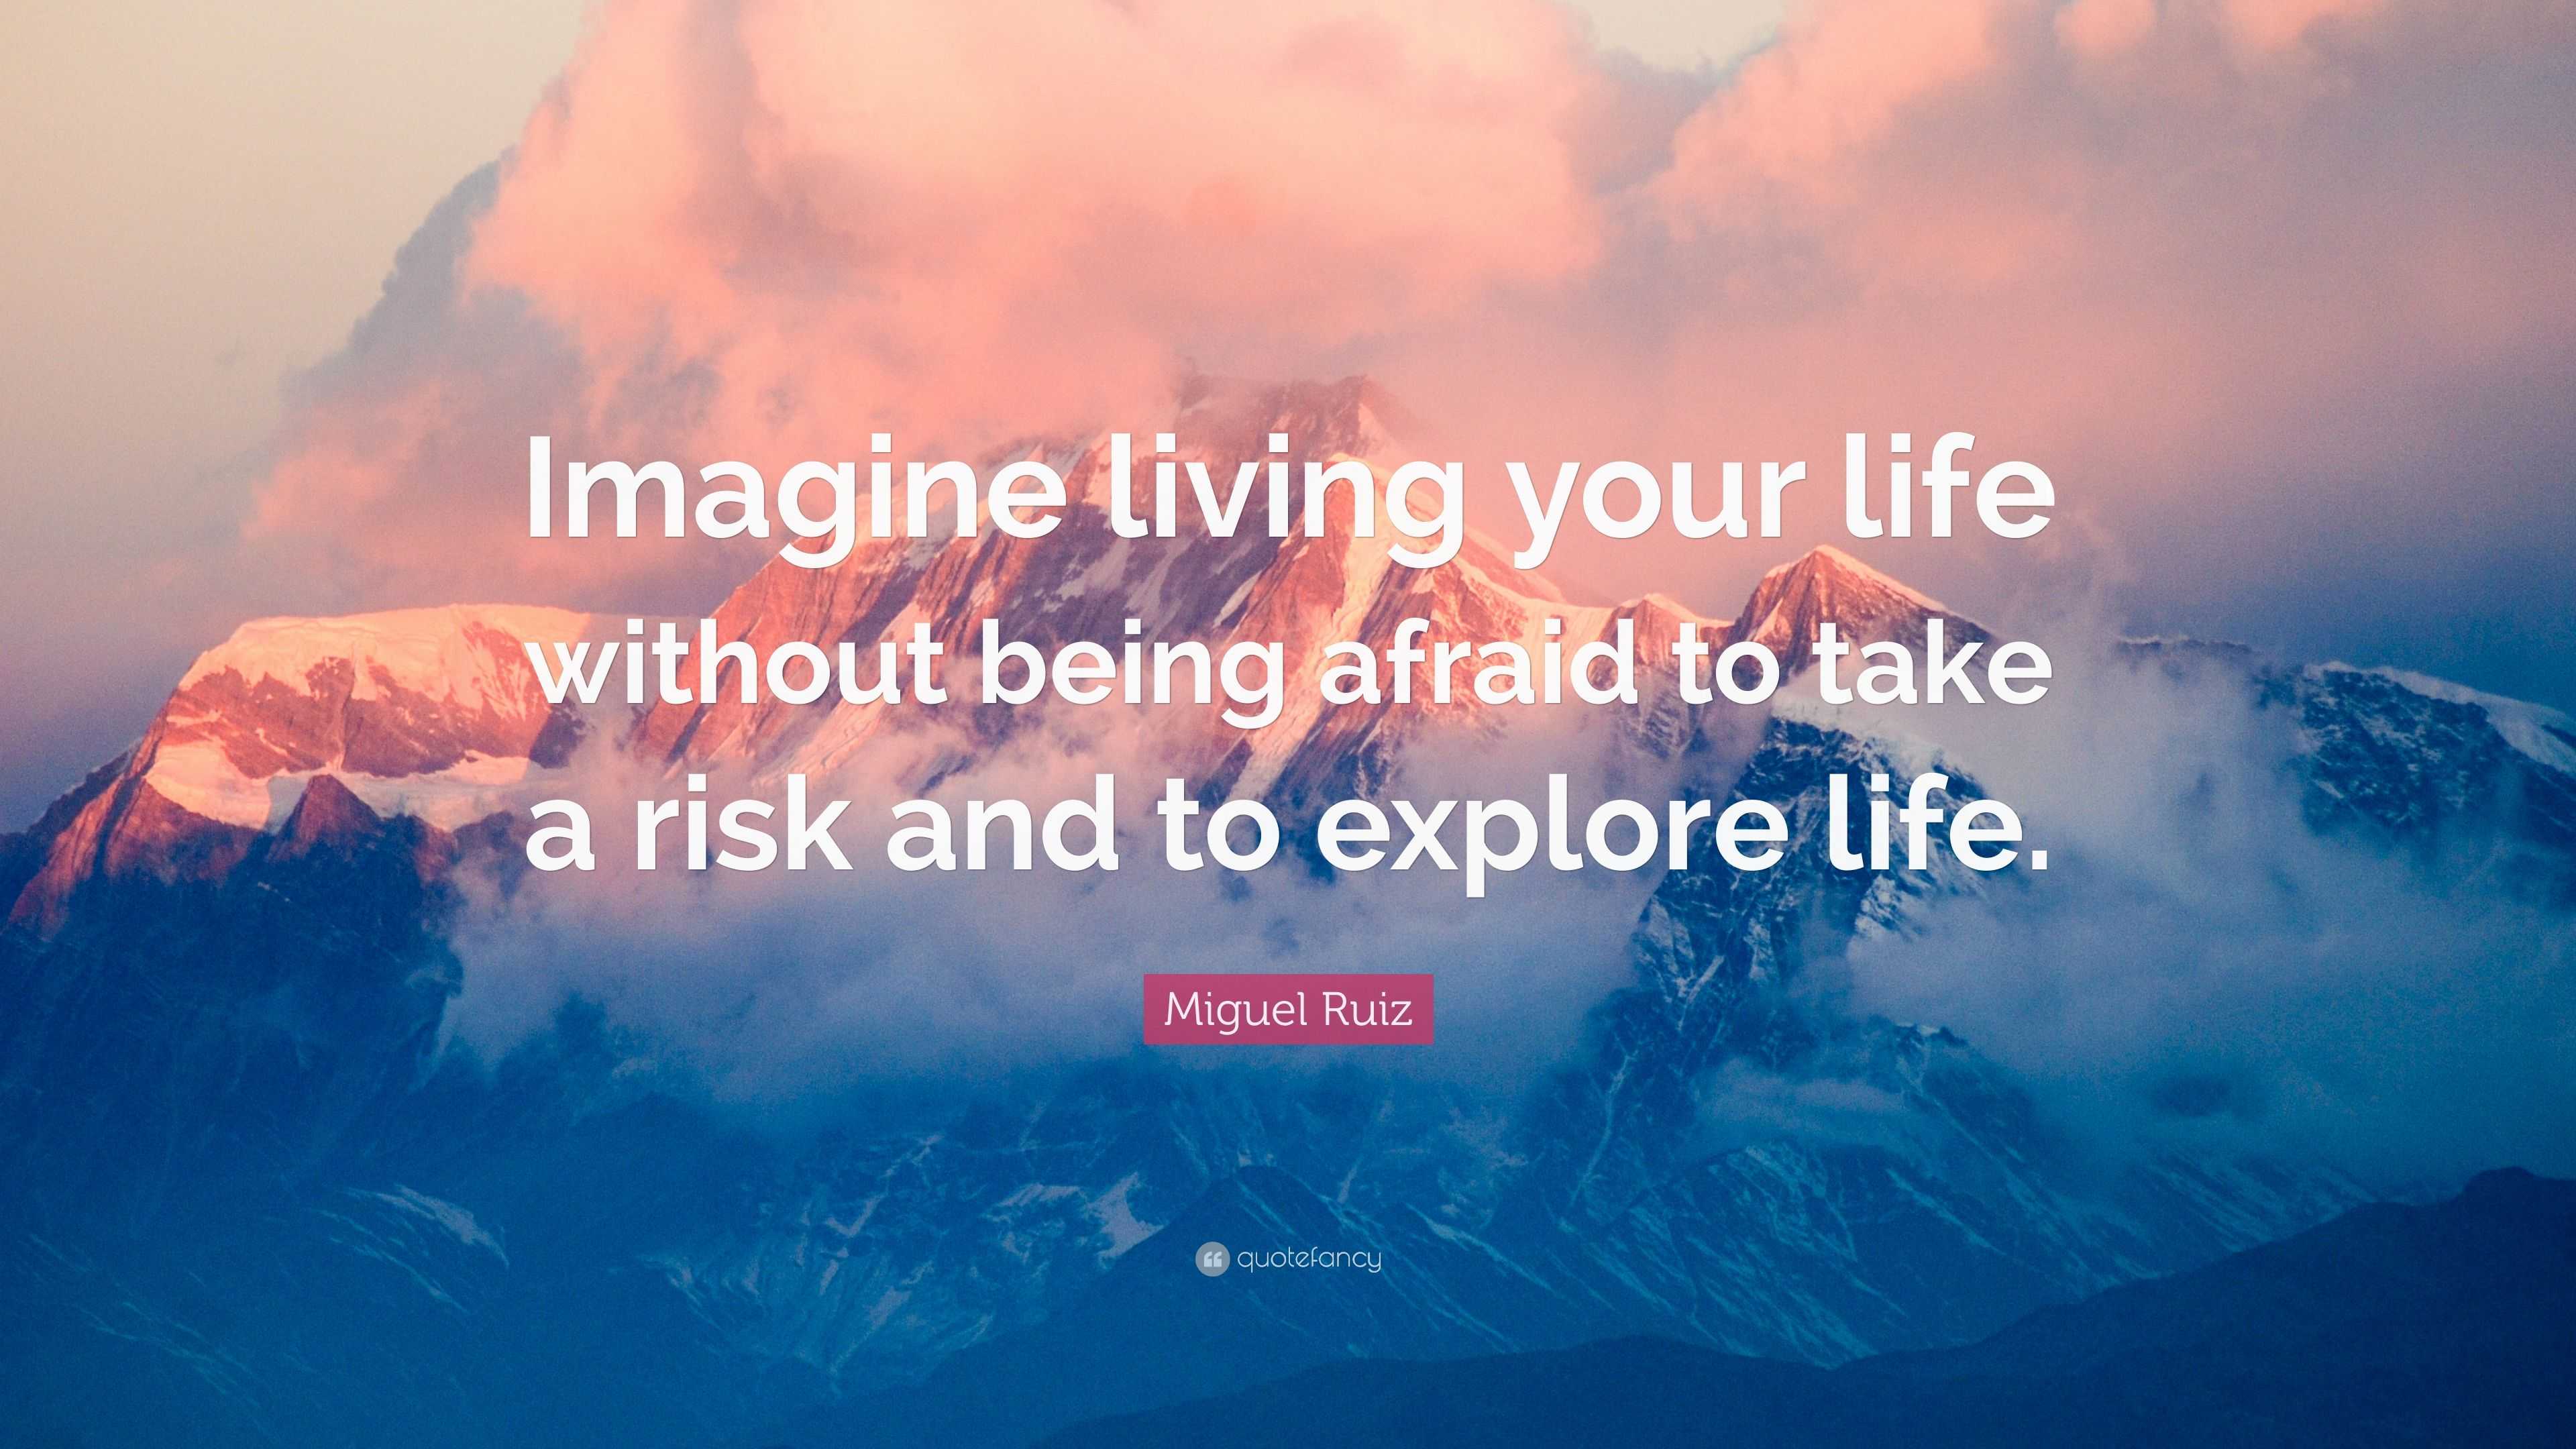 Miguel Ruiz Quote “Imagine living your life without being afraid to take a risk